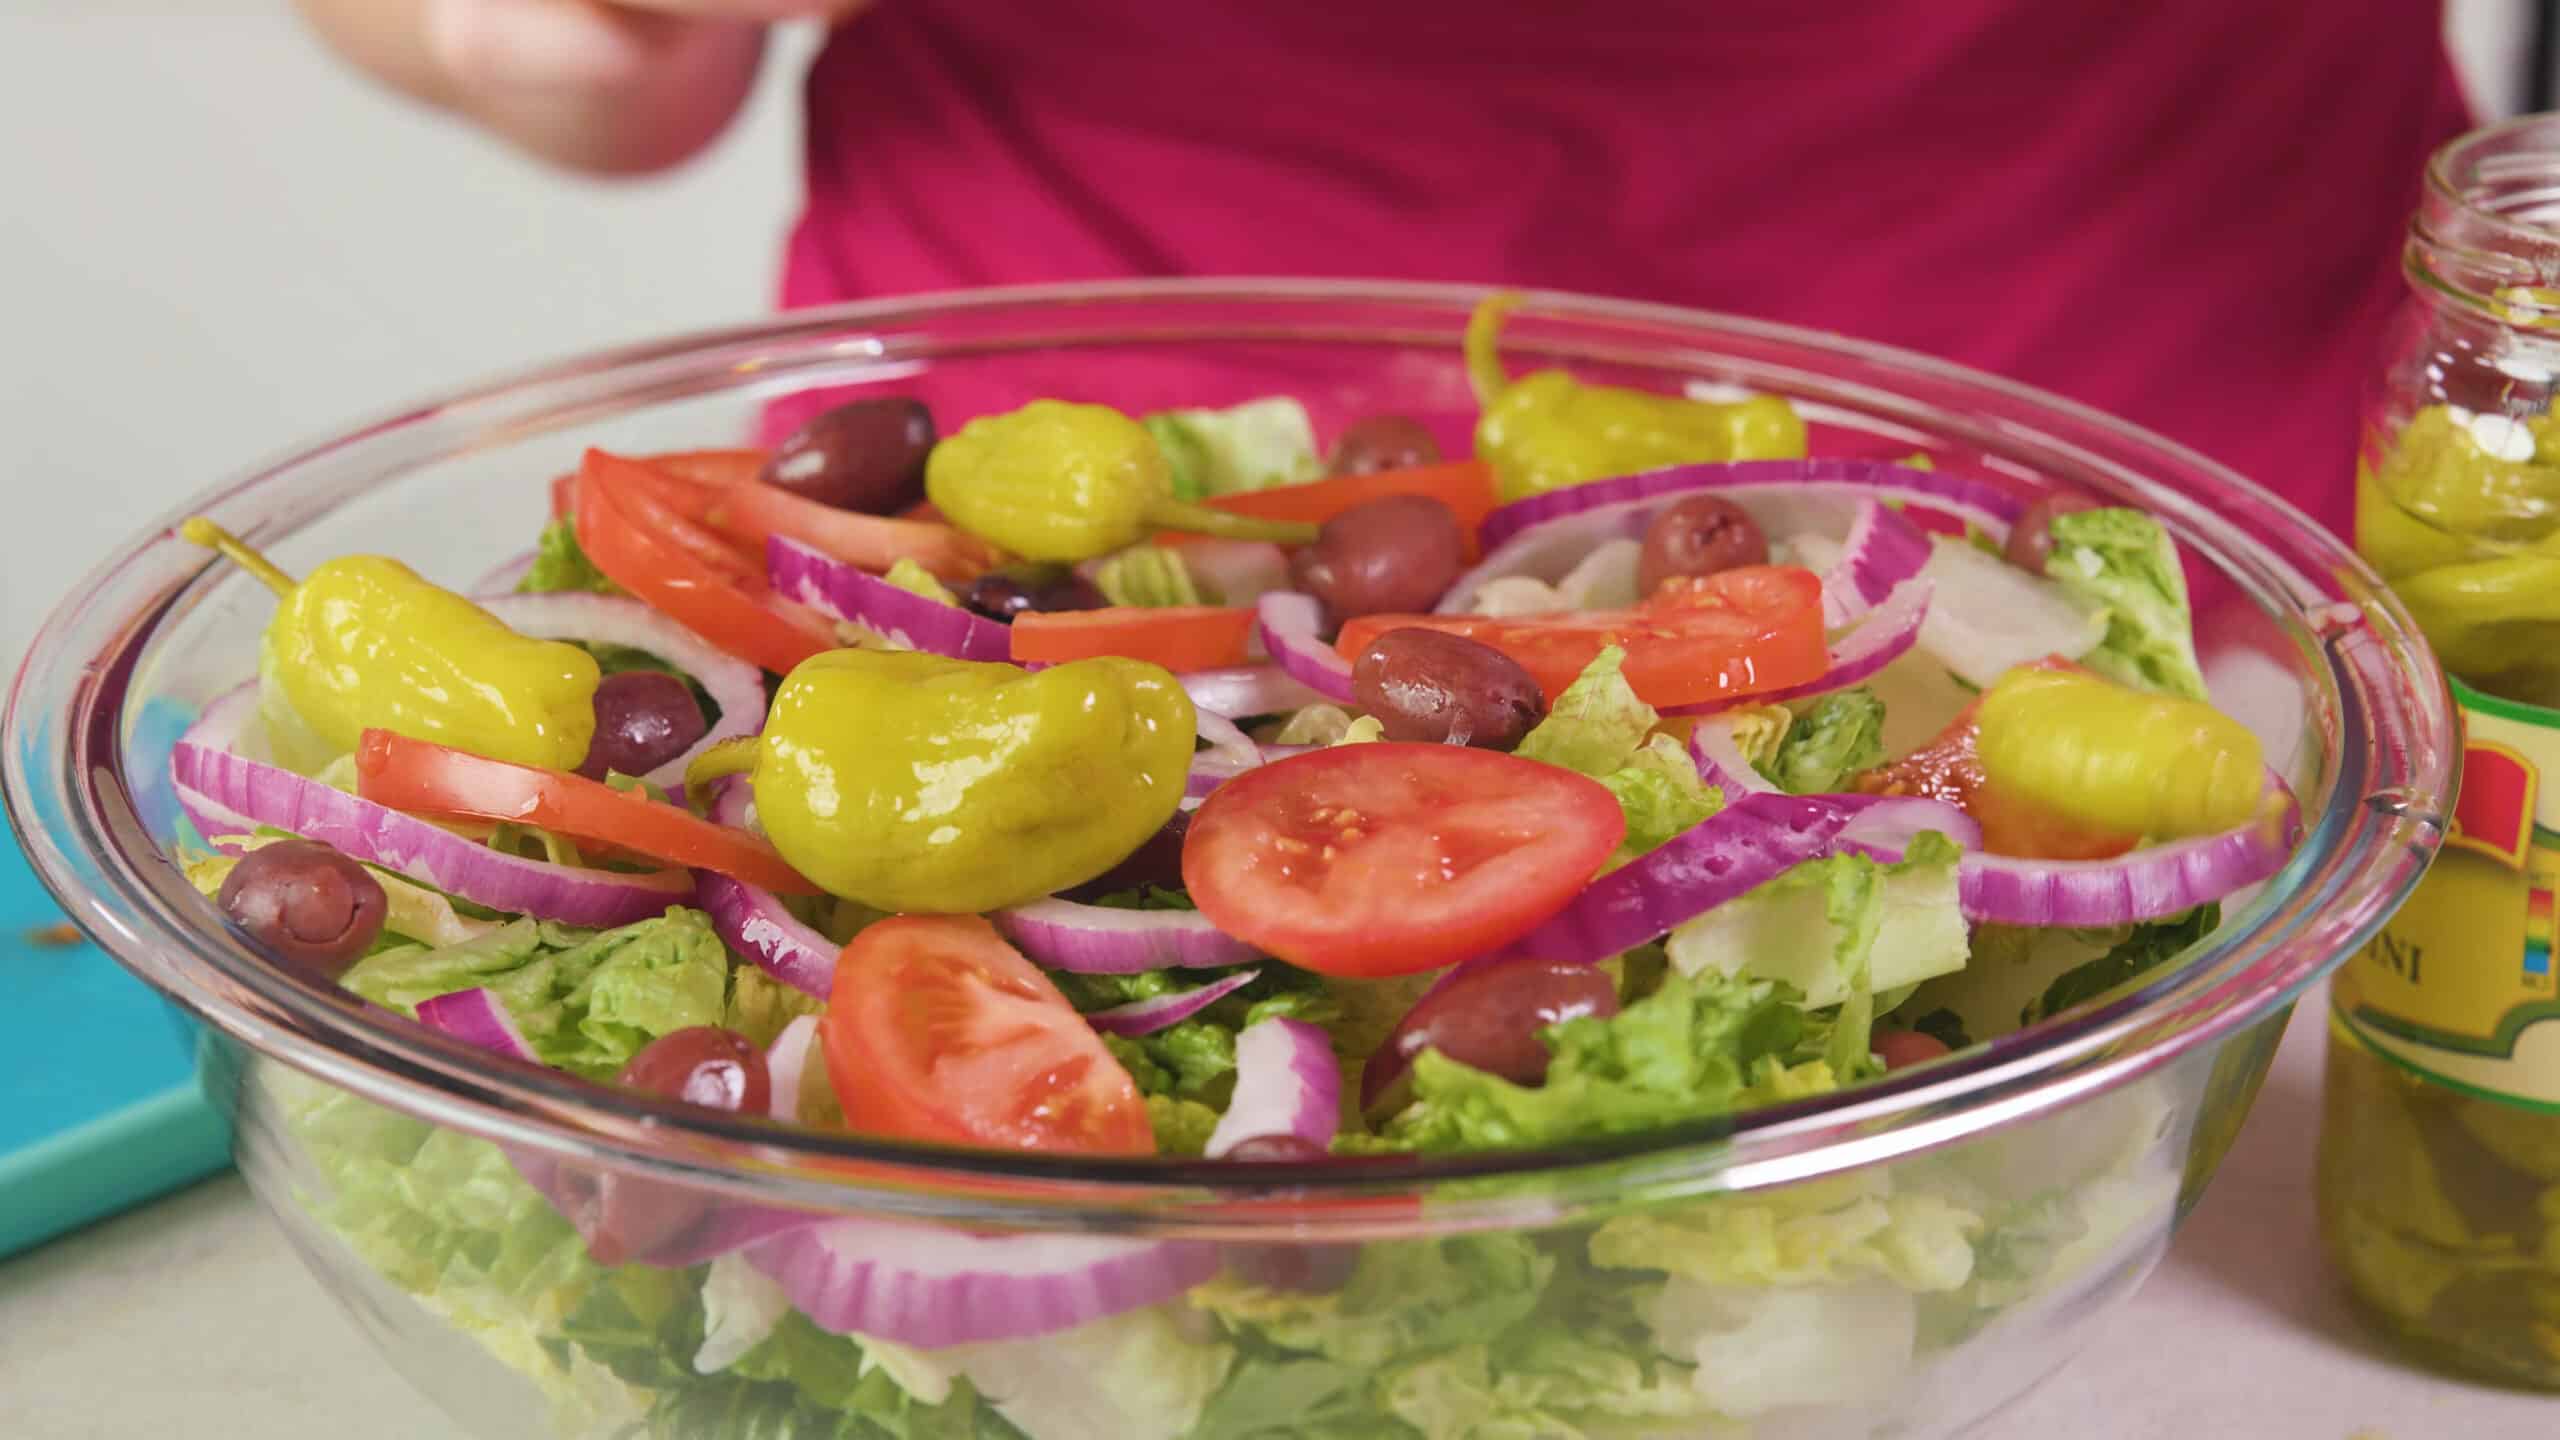 Angled view of a large clear glass mixing bowl filled with salad ingredients topped with pepperoncinis, pitted kalamata olives, sliced red onion, and sliced tomatoes.